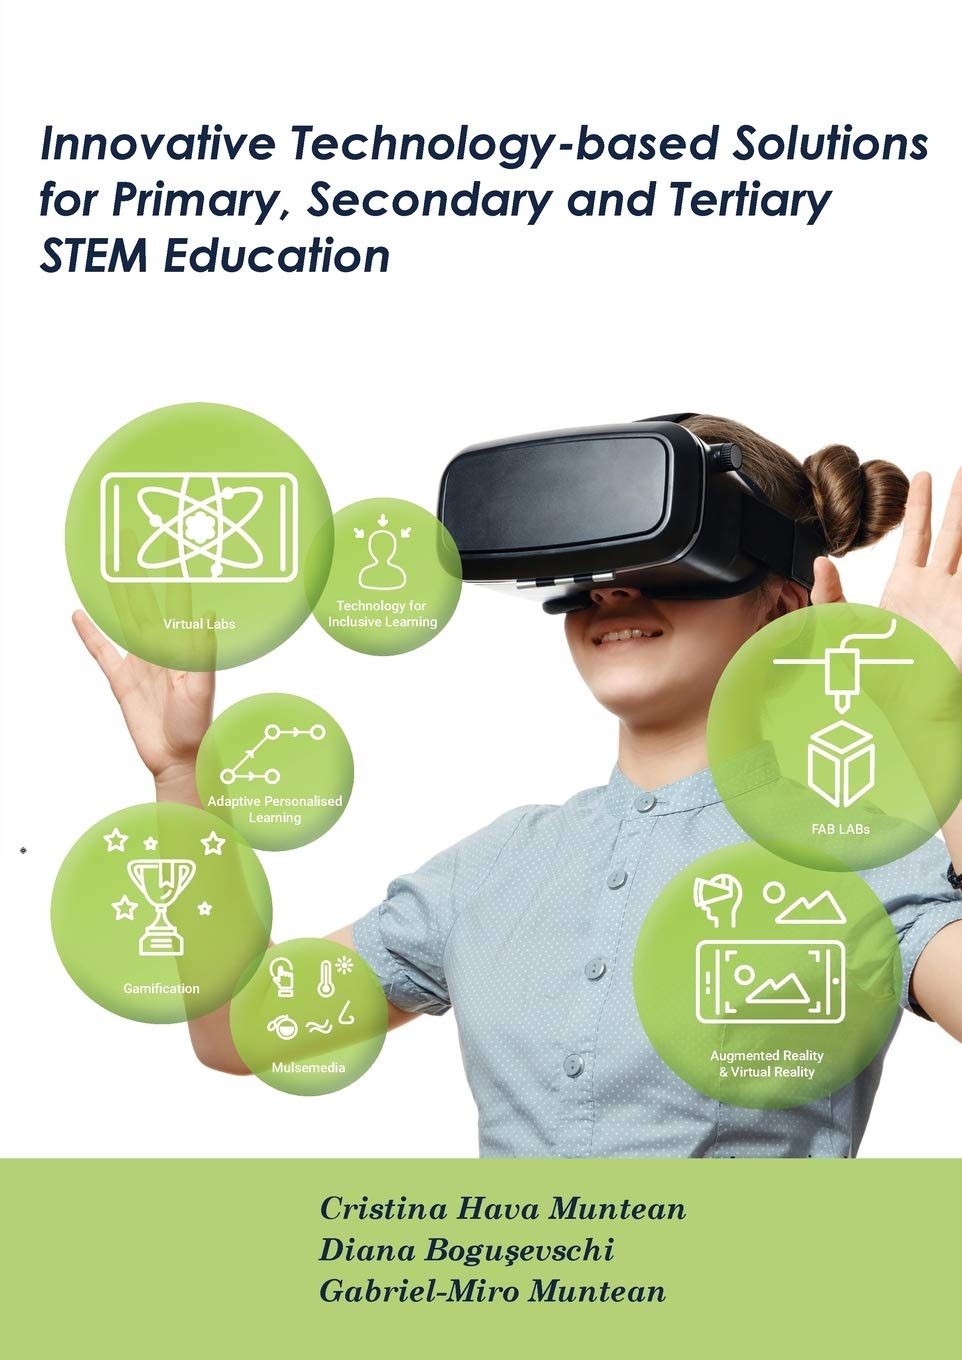 Innovative Technology Based Solutions for Primary, Secondary and Tertiary STEM Education